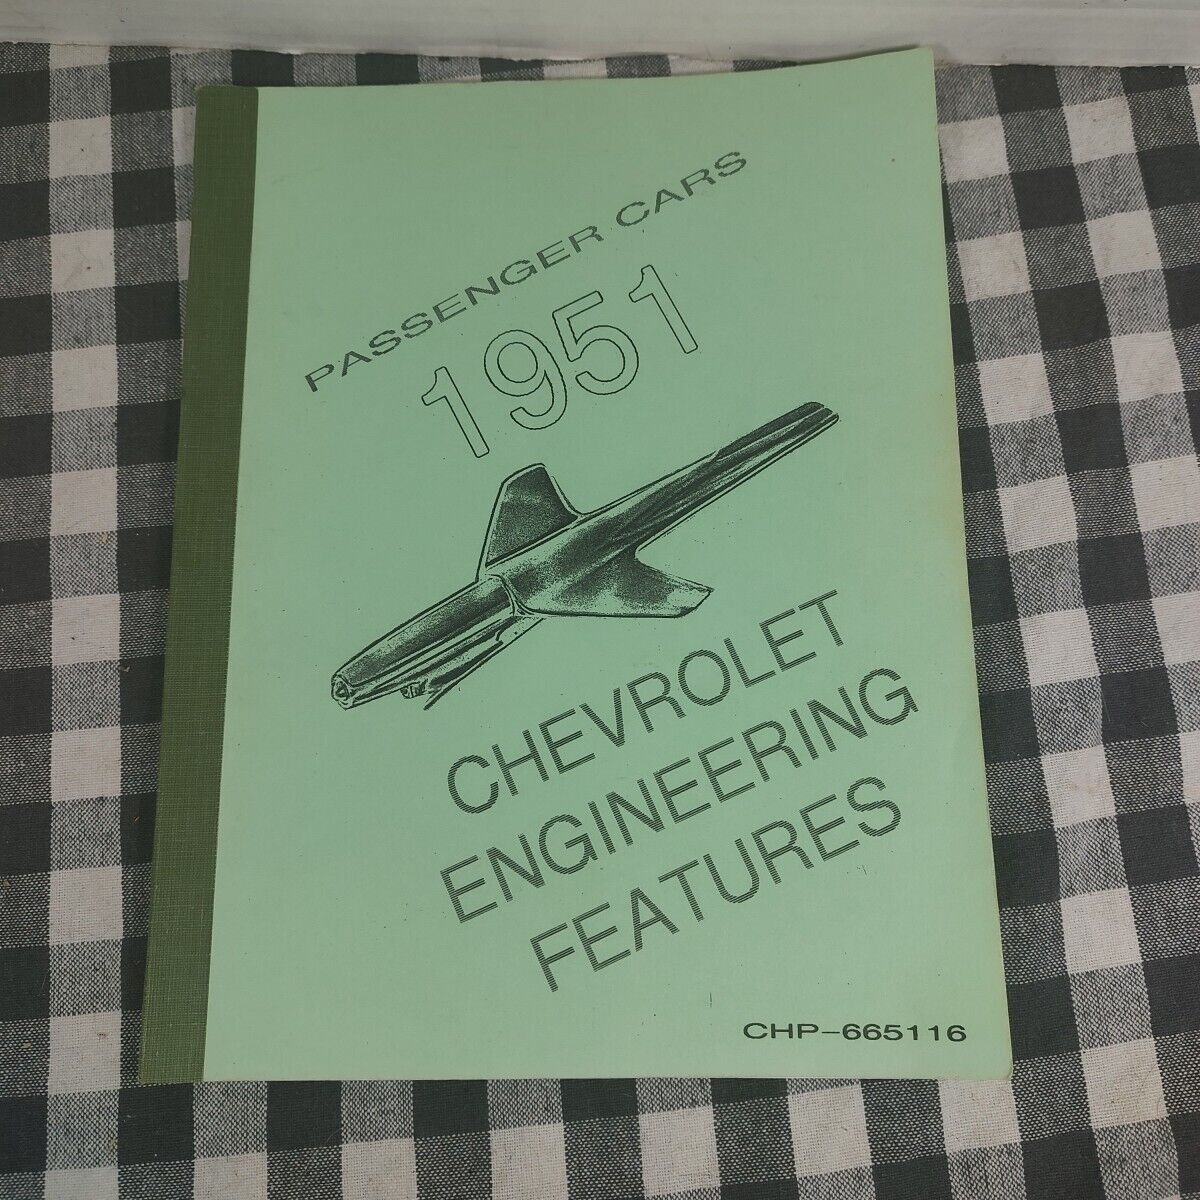 Chevrolet Engineering Features 1951 Passenger Cars,